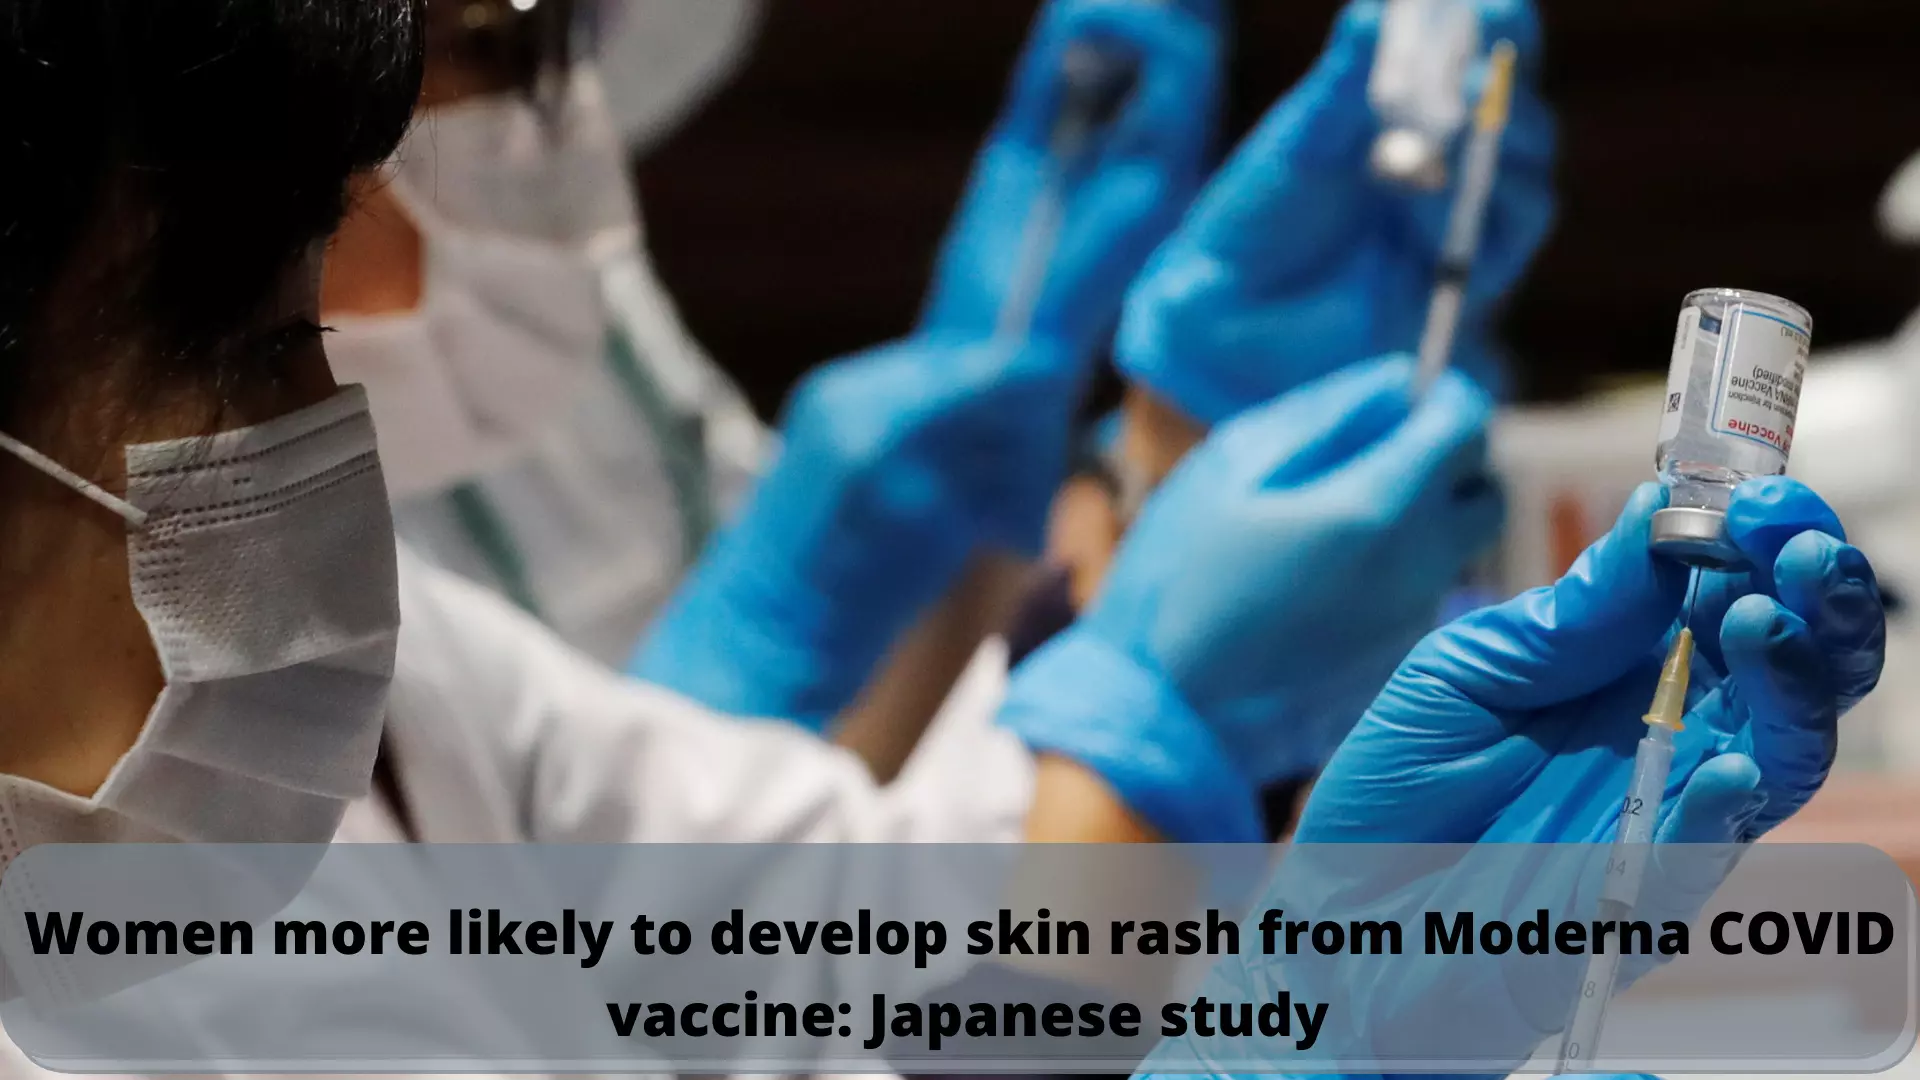 Women more likely to develop skin rash from Moderna COVID vaccine, says Japanese study